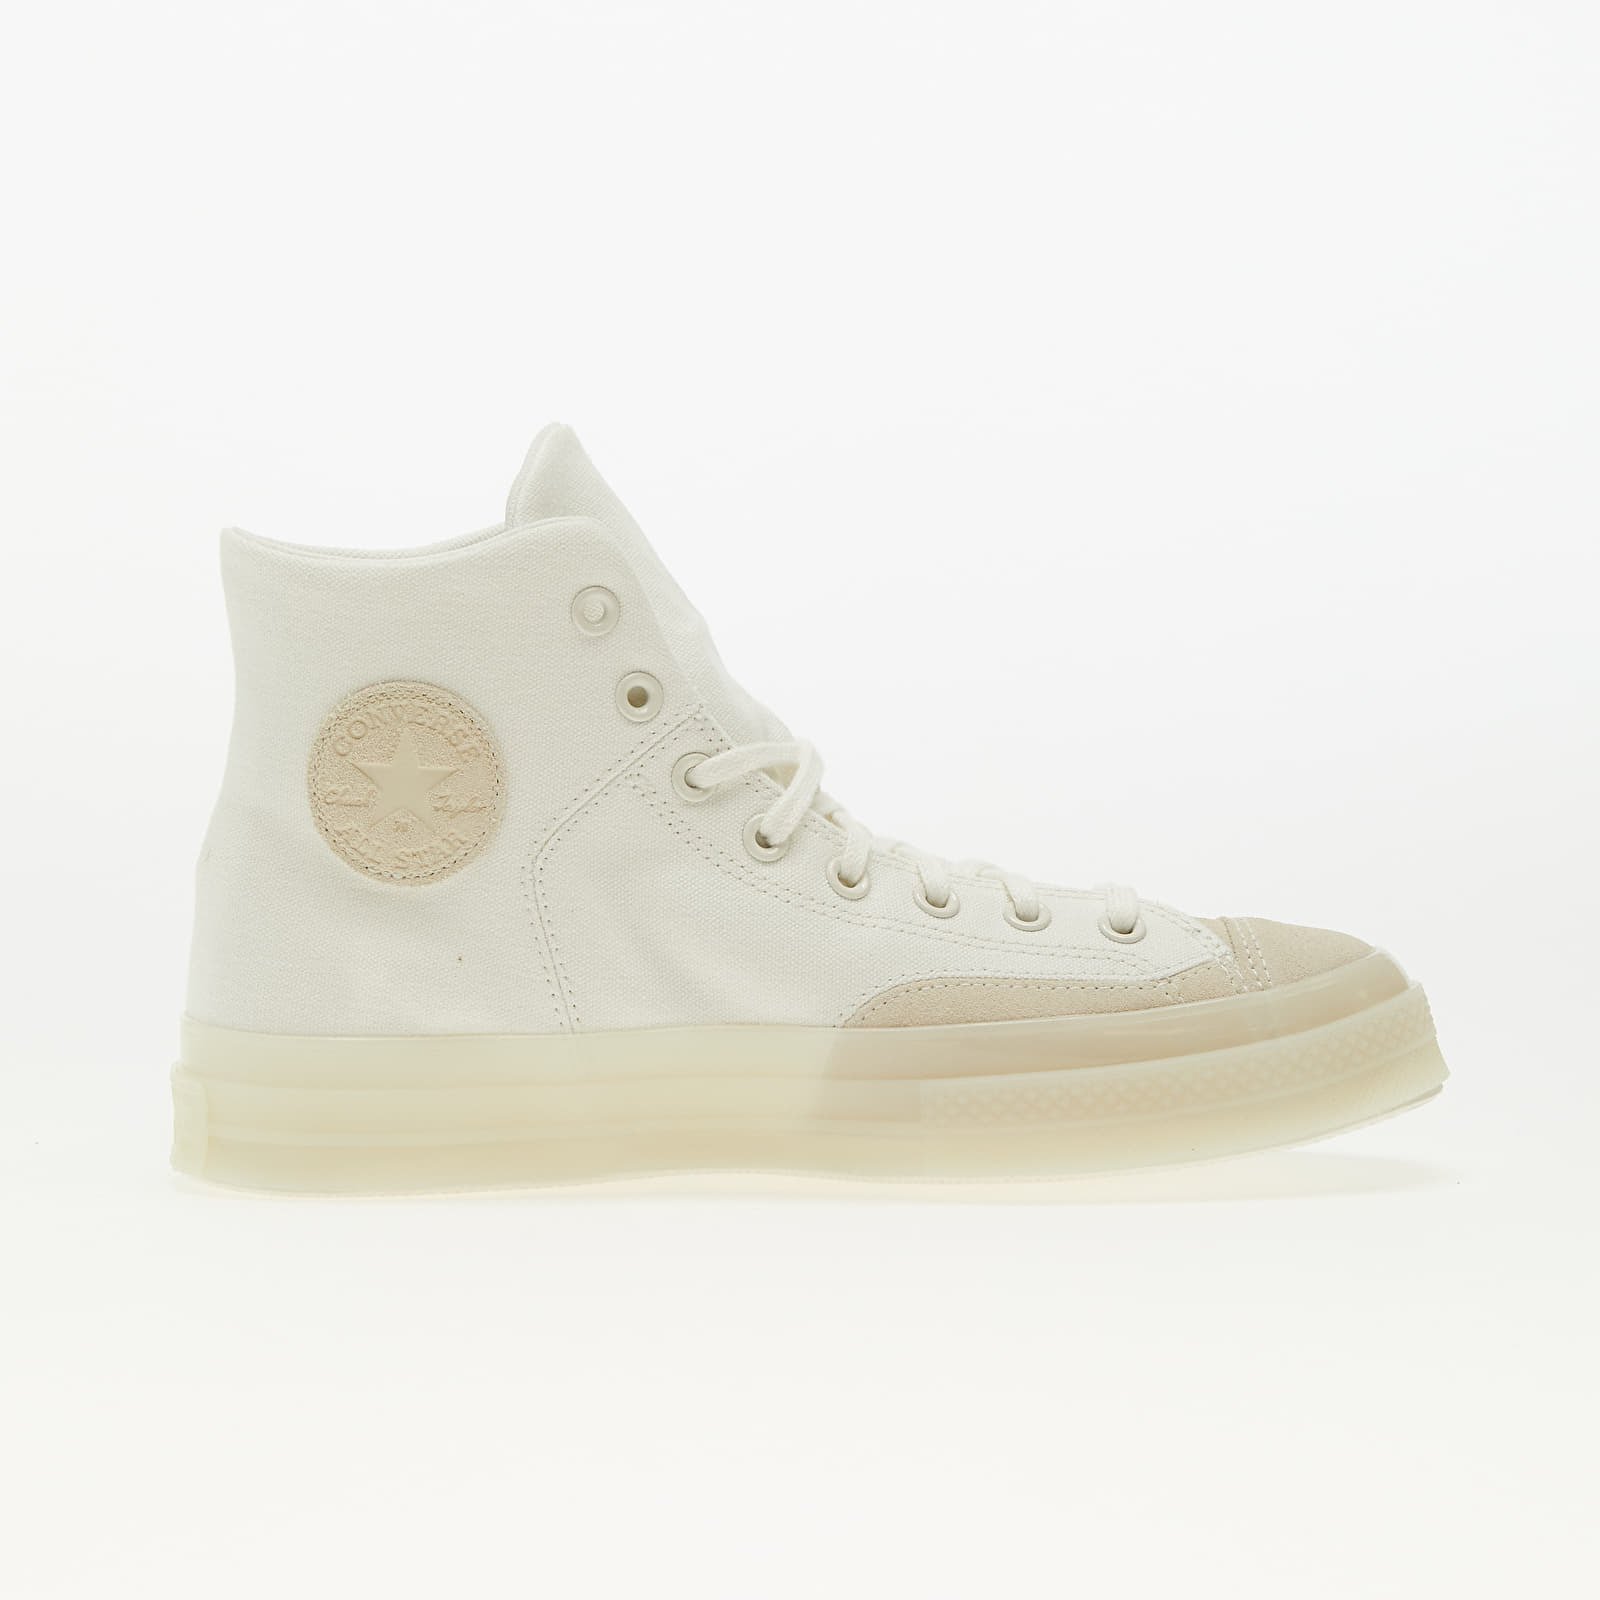 Converse x Off-White White Canvas High Top Trainers Sneakers Size 44.5 Off- White